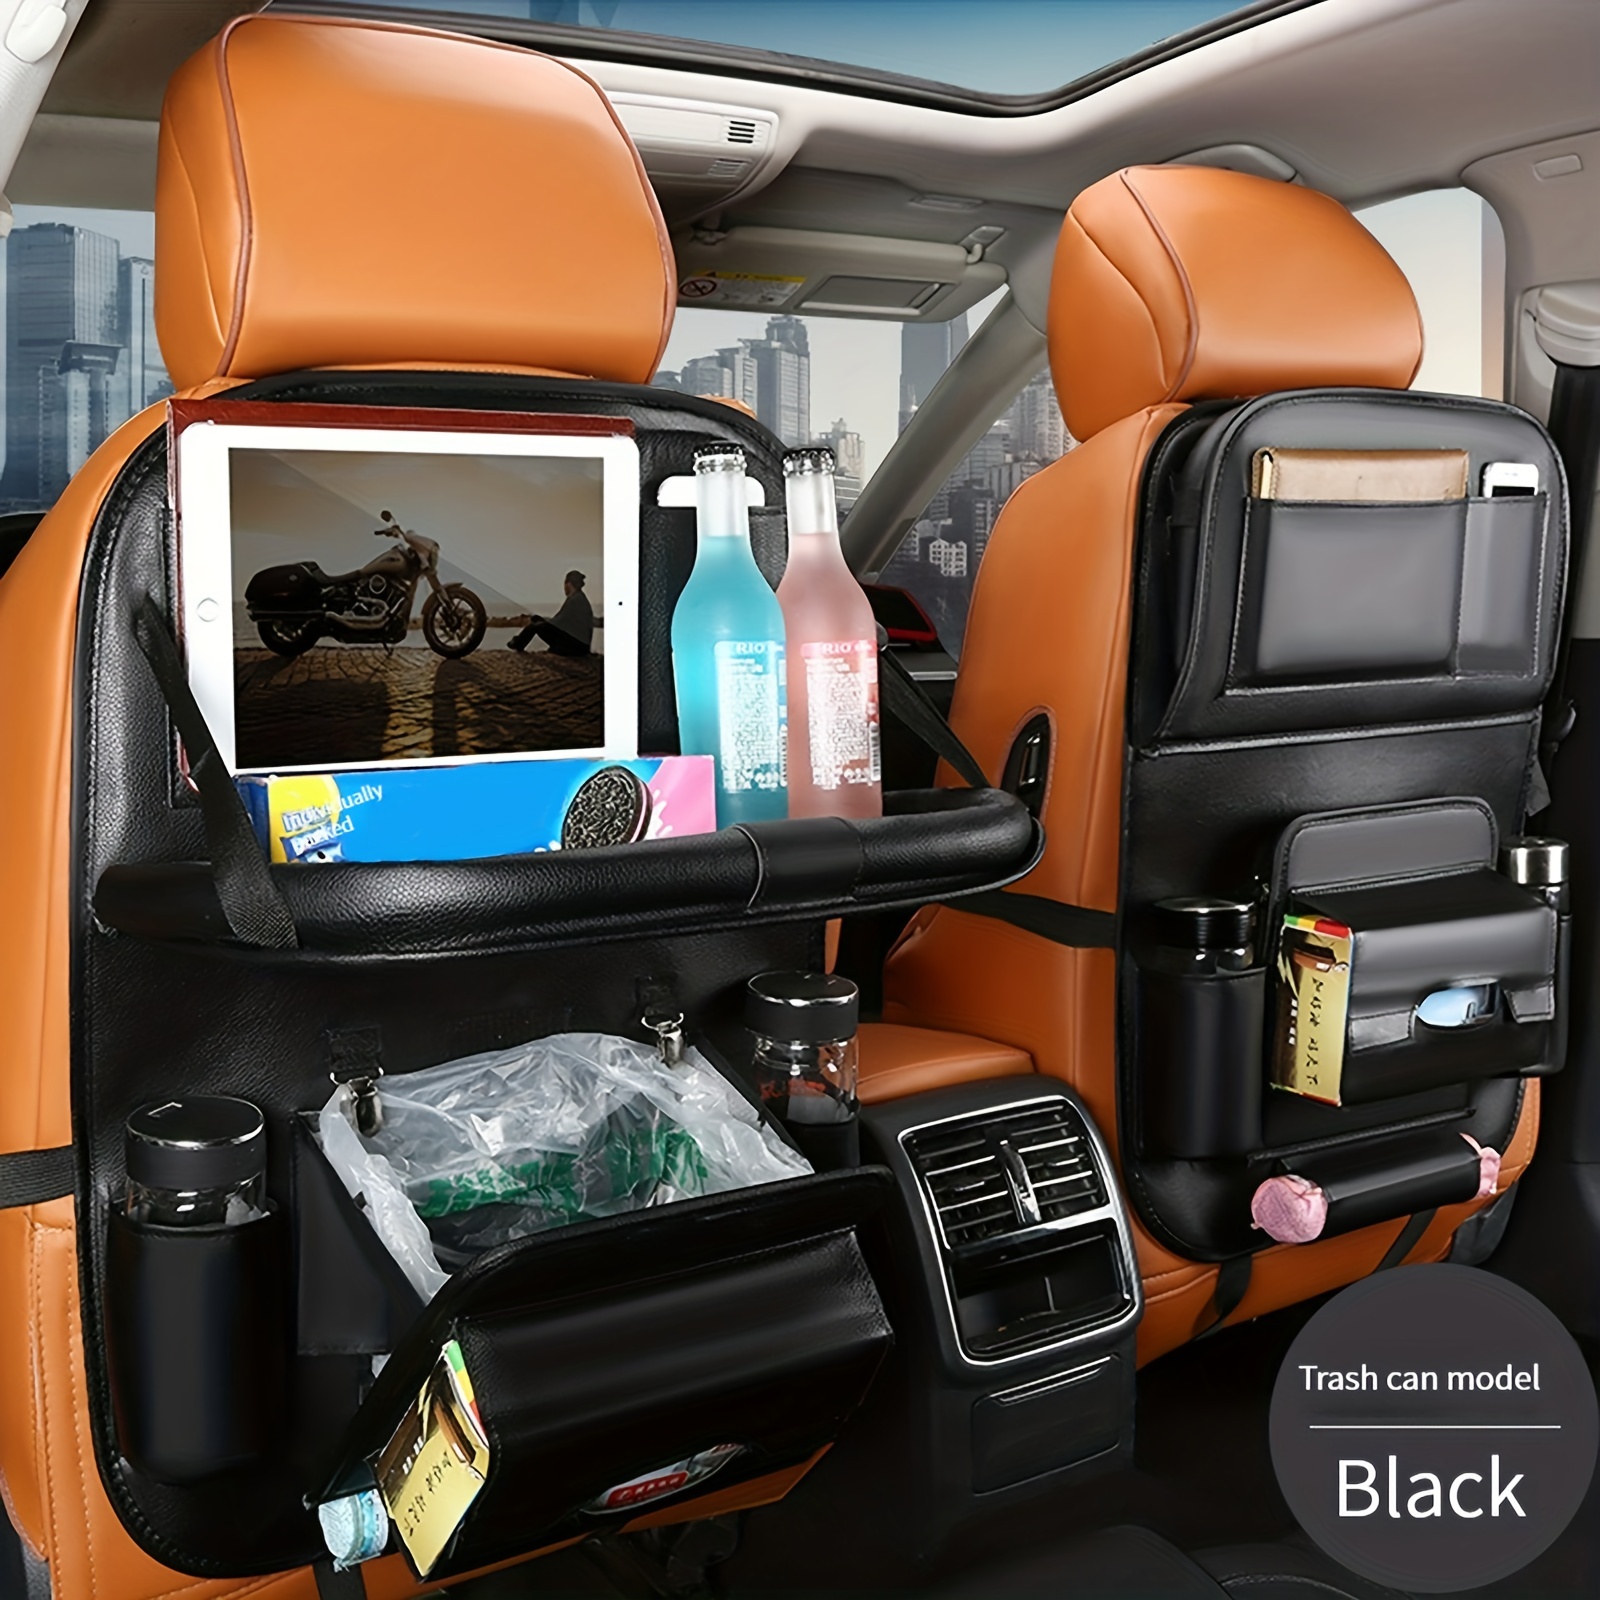 Luxury 8 Pocket Leather Suv Rear Storage Organizer With Multi Pockets For Rear  Seat Back Storage And Tidying Interior Accessories From Lshl520, $24.15